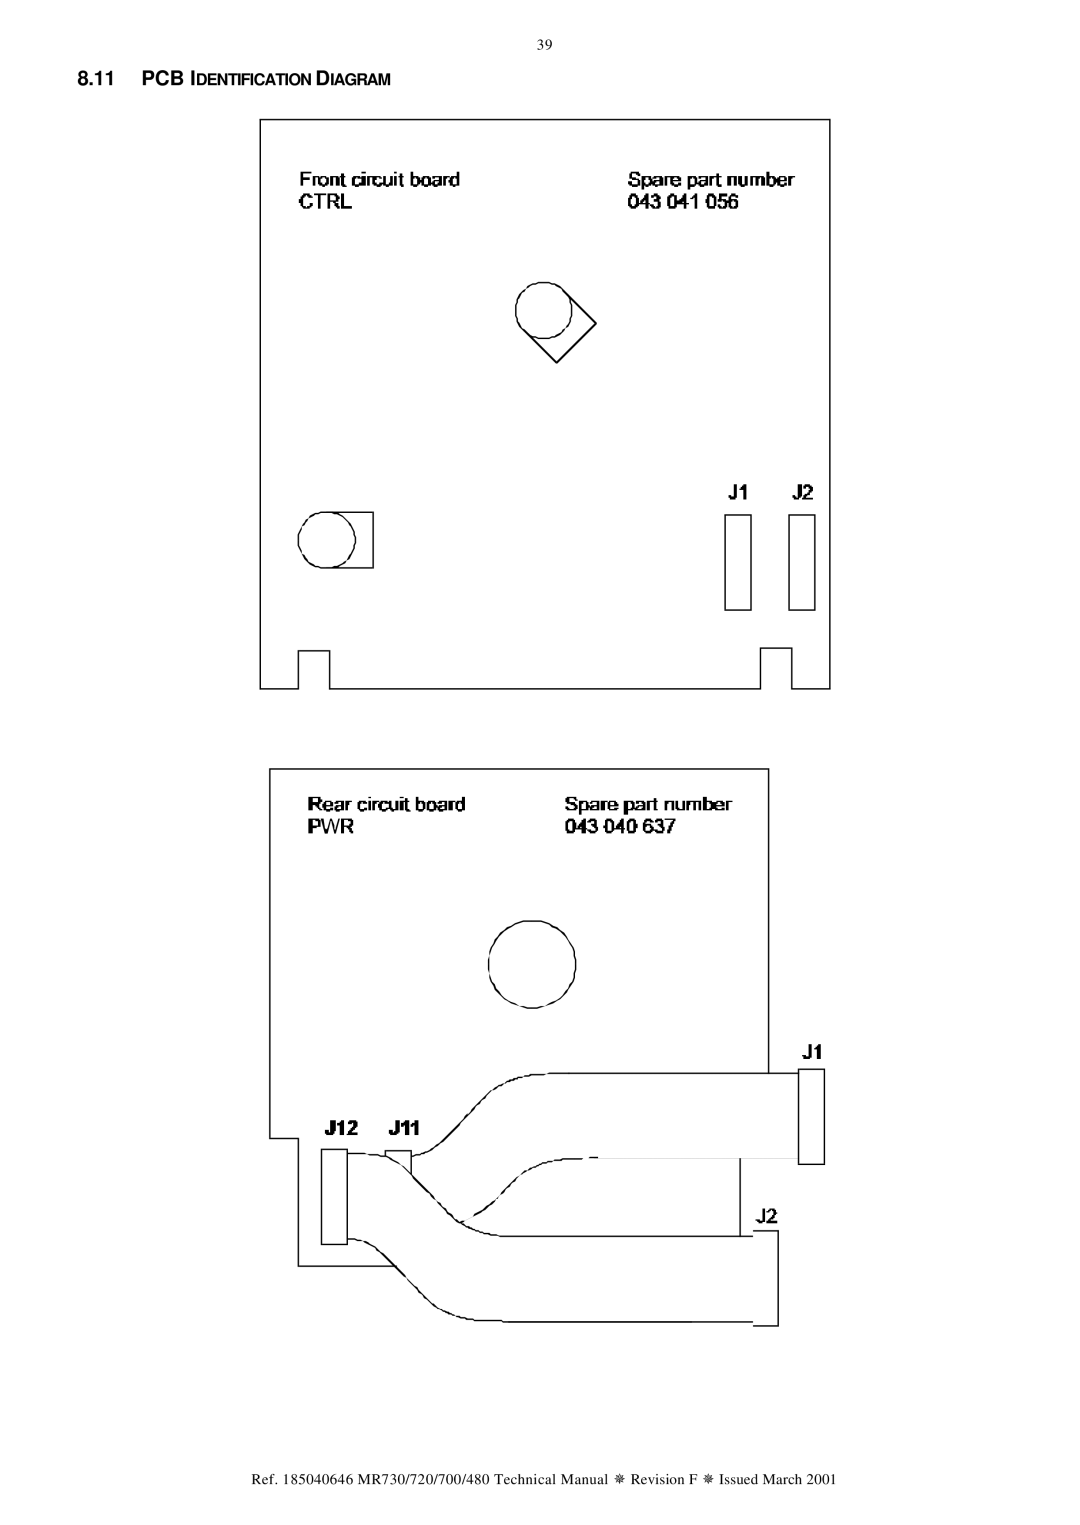 Fisher & Paykel MR730, MR720, MR480, MR700 technical manual PCB Identification Diagram 